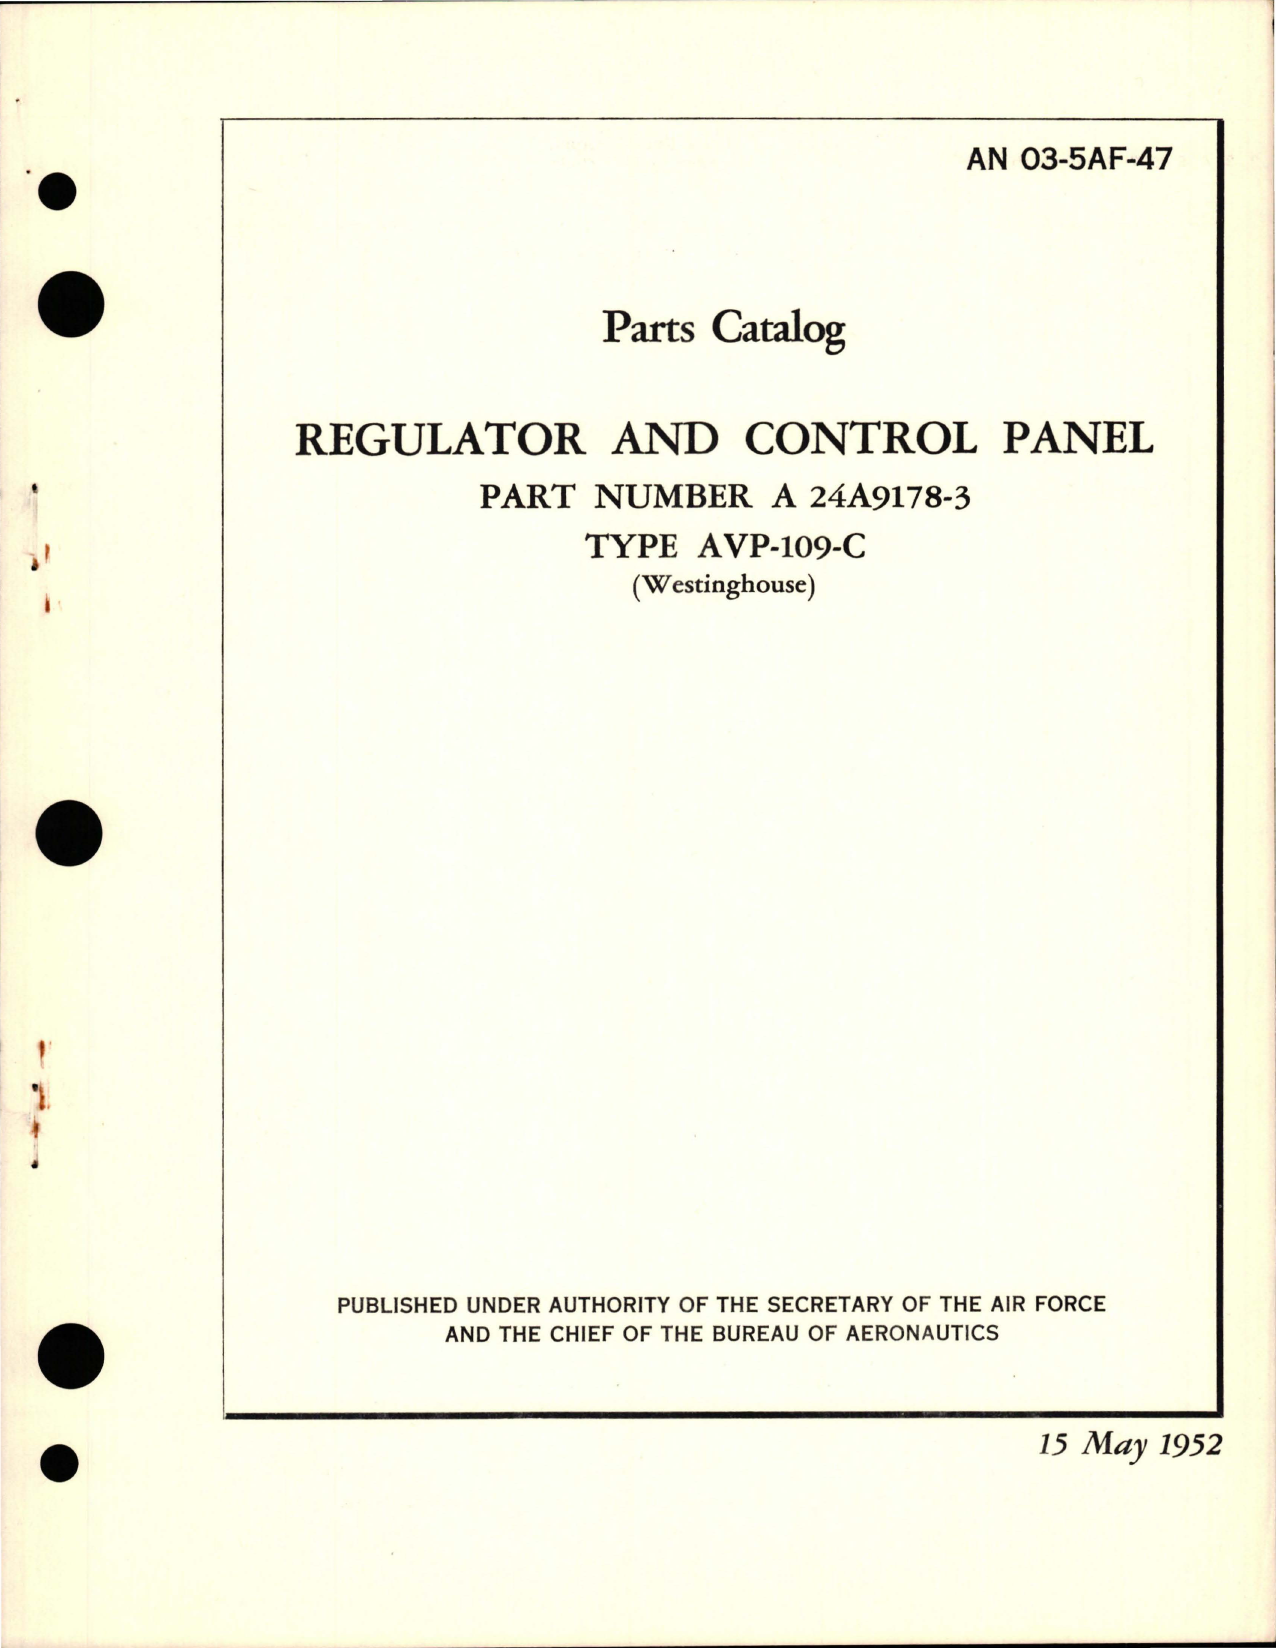 Sample page 1 from AirCorps Library document: Parts Catalog for Regulator & Control Panel - Parts A 24A9178-3 - Type AVP-109-C 